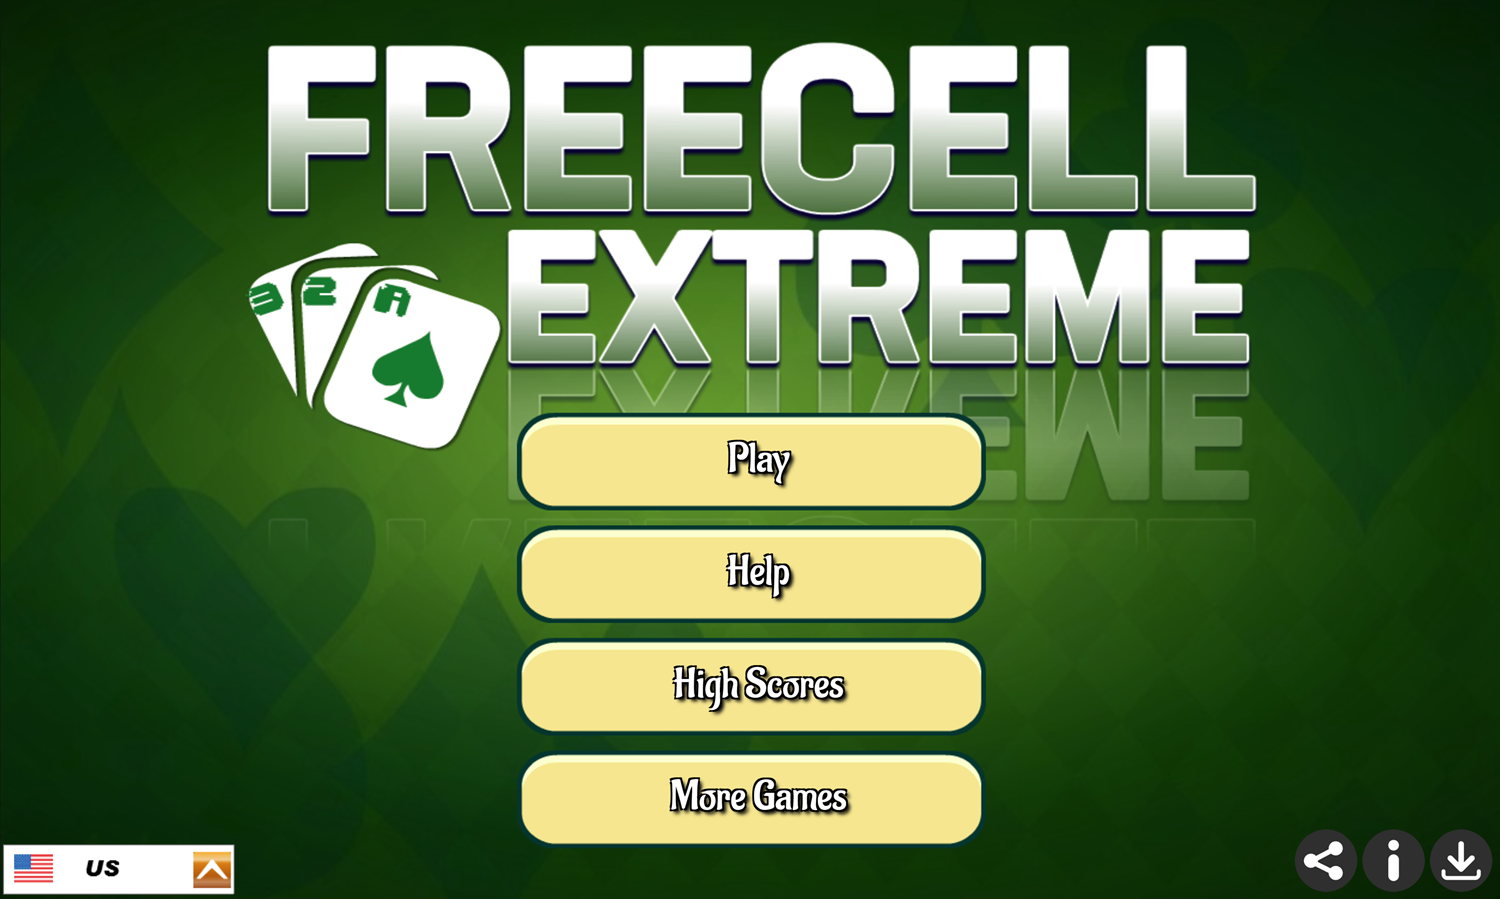 Freecell Extreme Game Welcome Screen Screenshot.